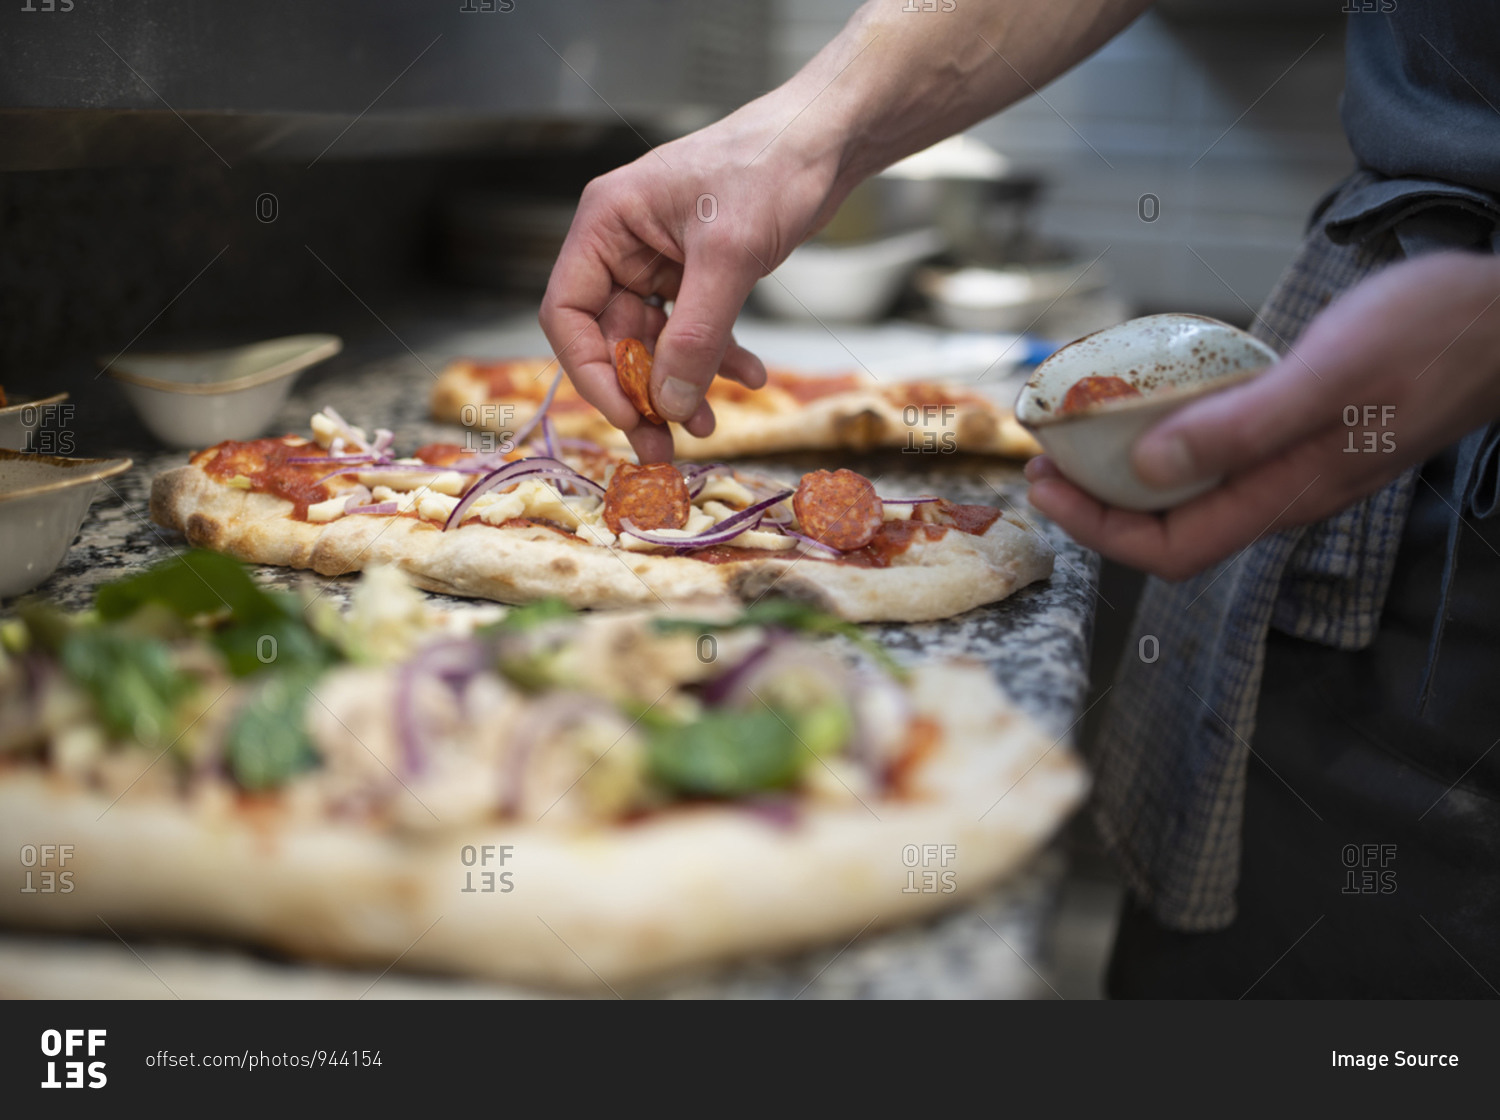 Chef placing sausage onto Pinsa Romana base, a Roman style pizza blend reducing sugar and saturated fat, containing rice and soy with less gluten, close up of hands